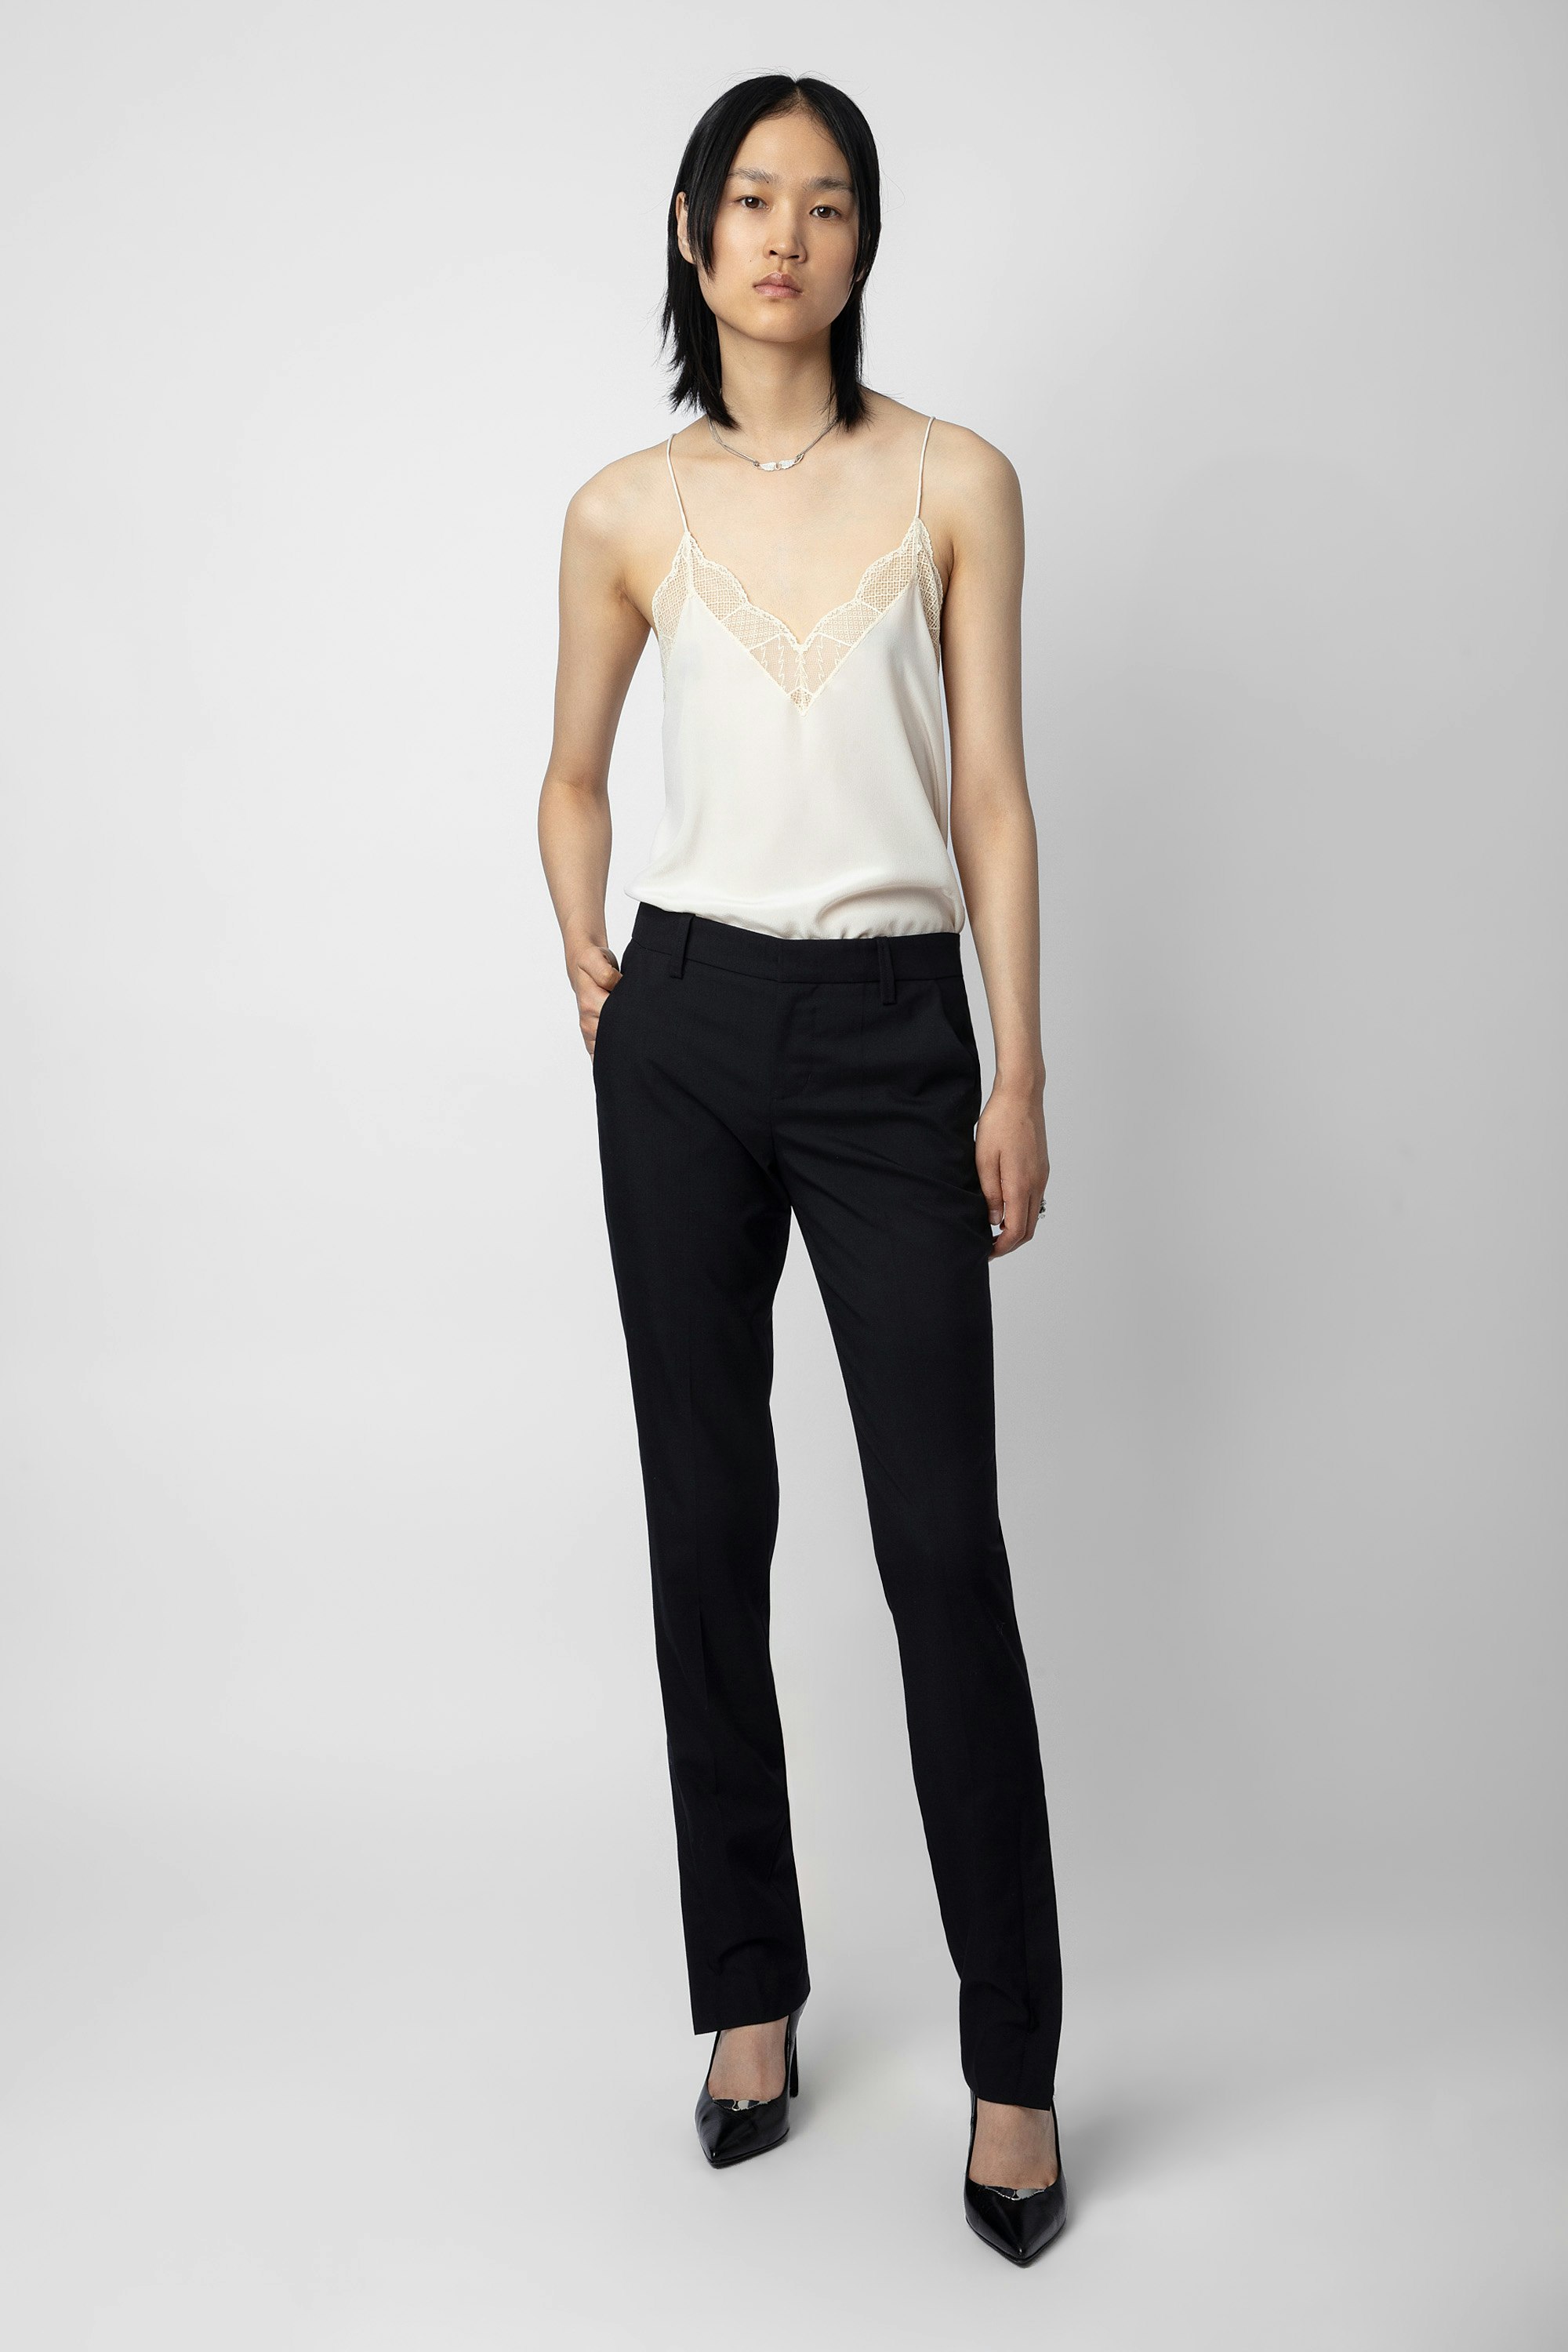 Prune Trousers - Women’s black tailored trousers with zipped hem.